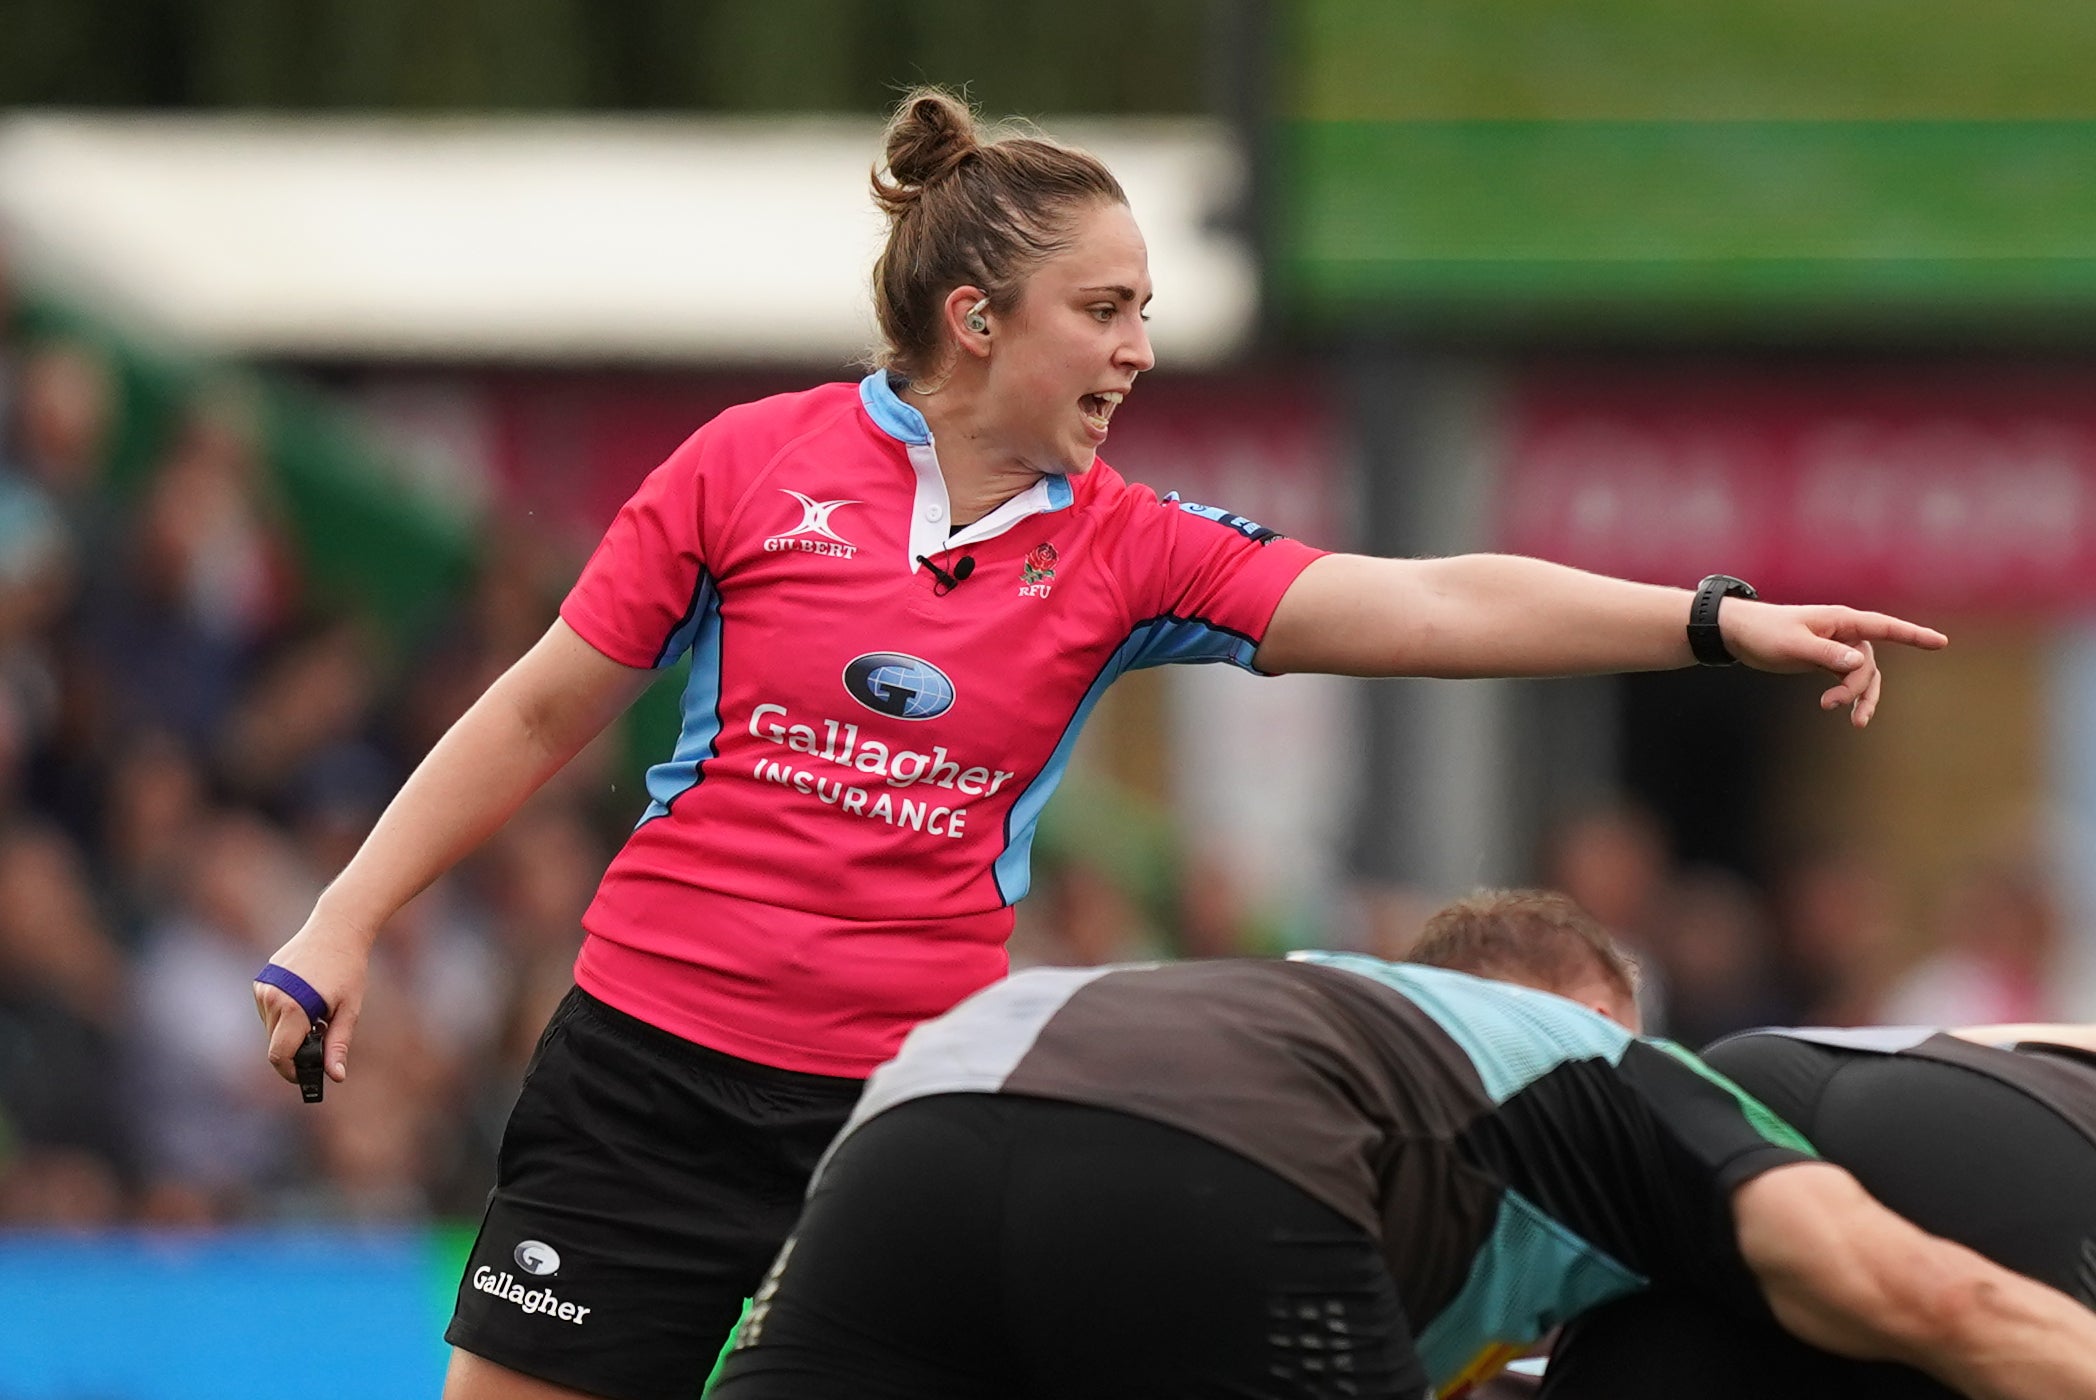 Referee Sara Cox in action during the Gallagher Premiership game between Harlequins and Worcester (Kirsty O’Connor/PA)